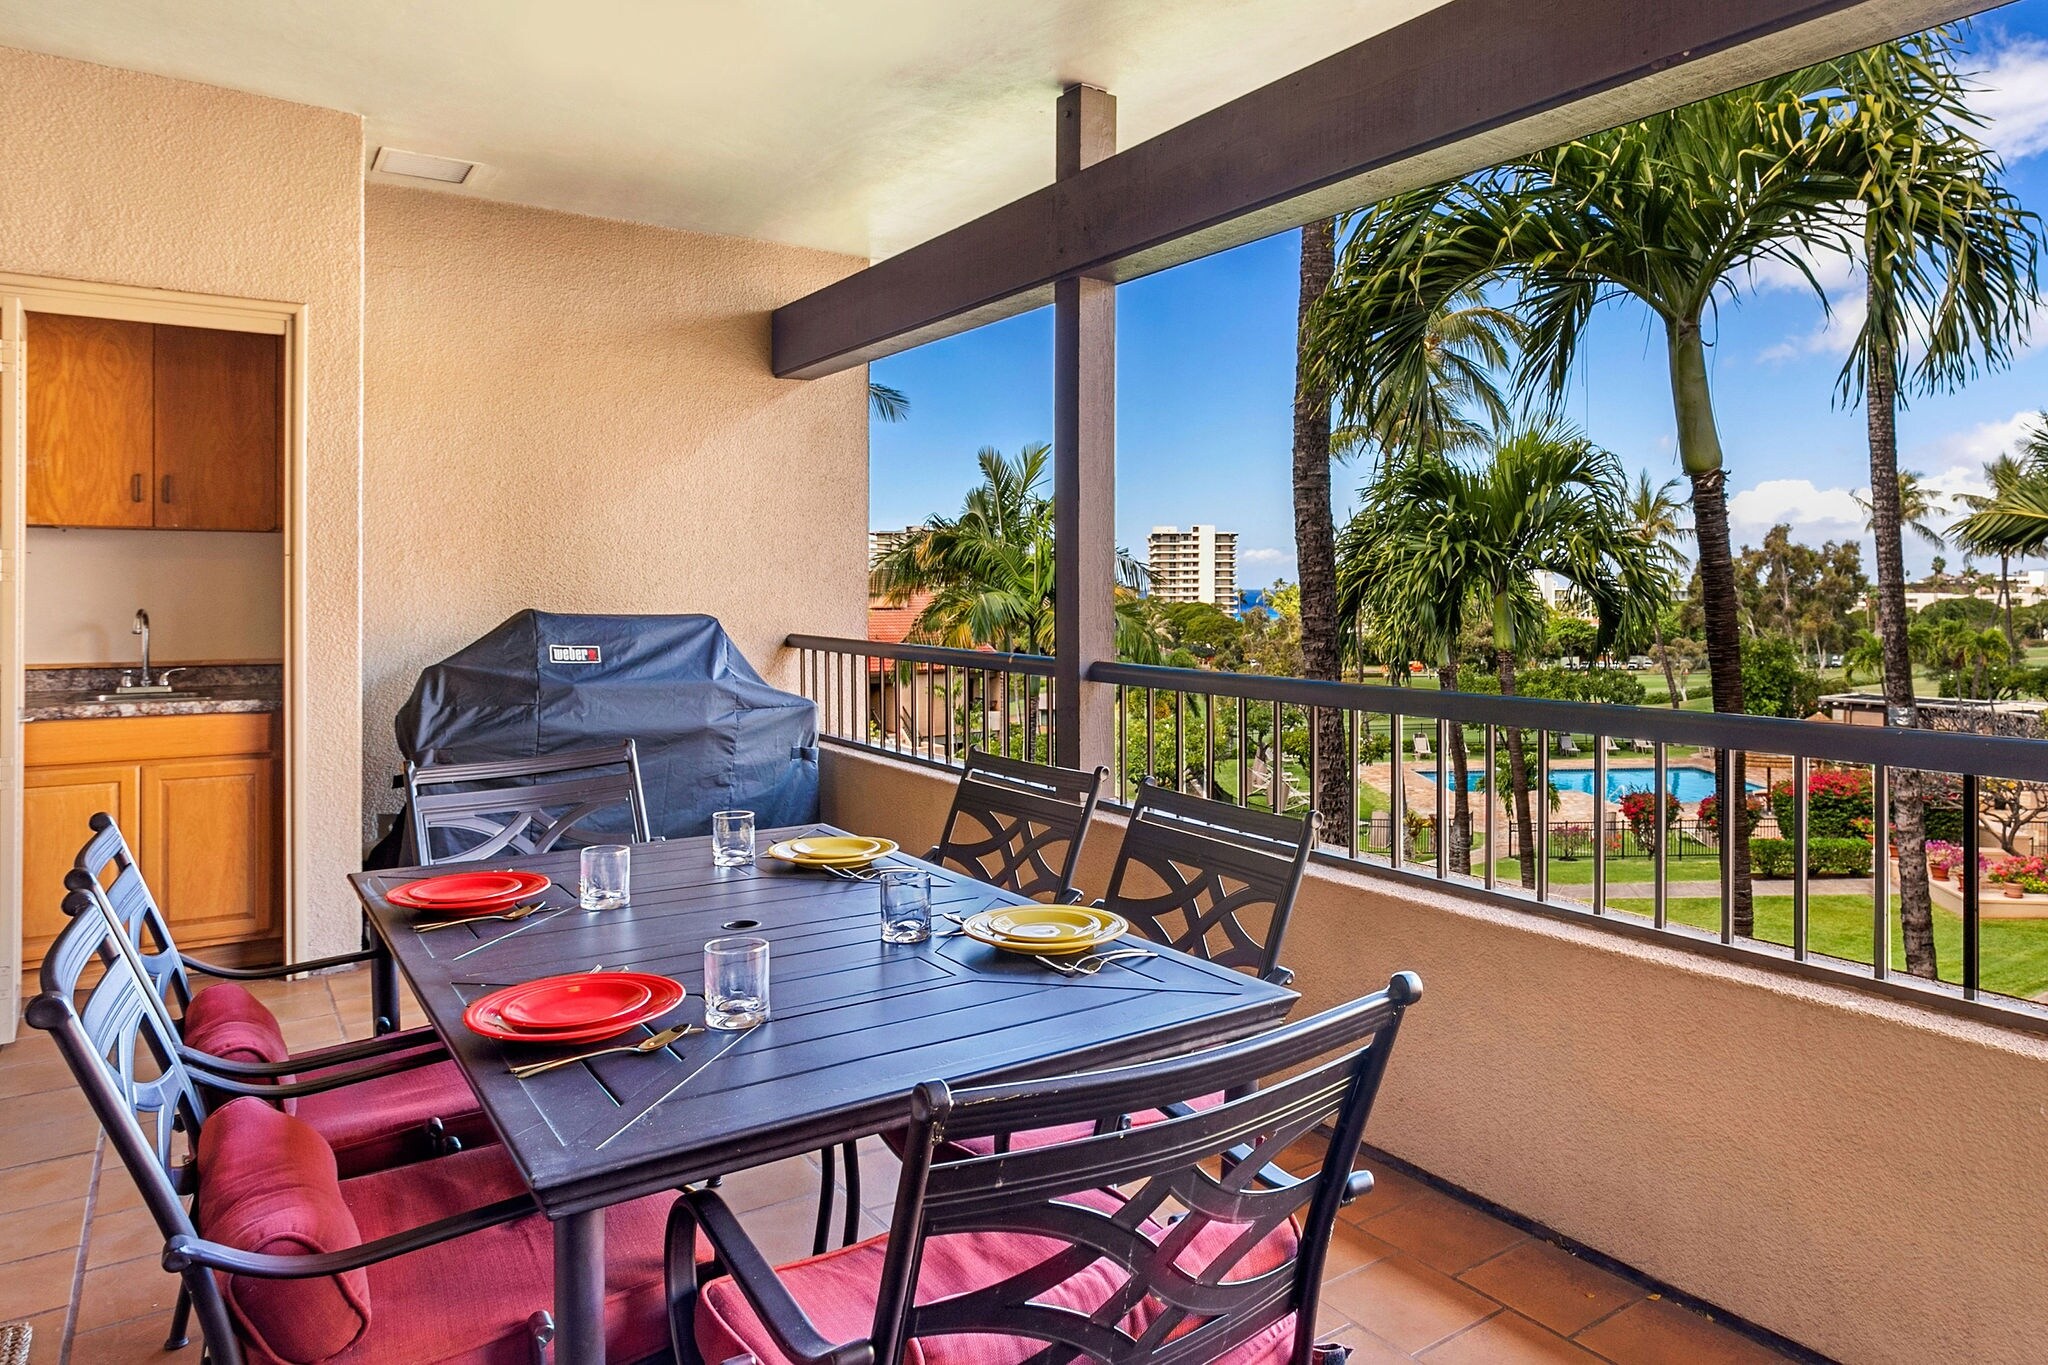 Enjoy views of the pool~ golf course and peaks of the ocean!